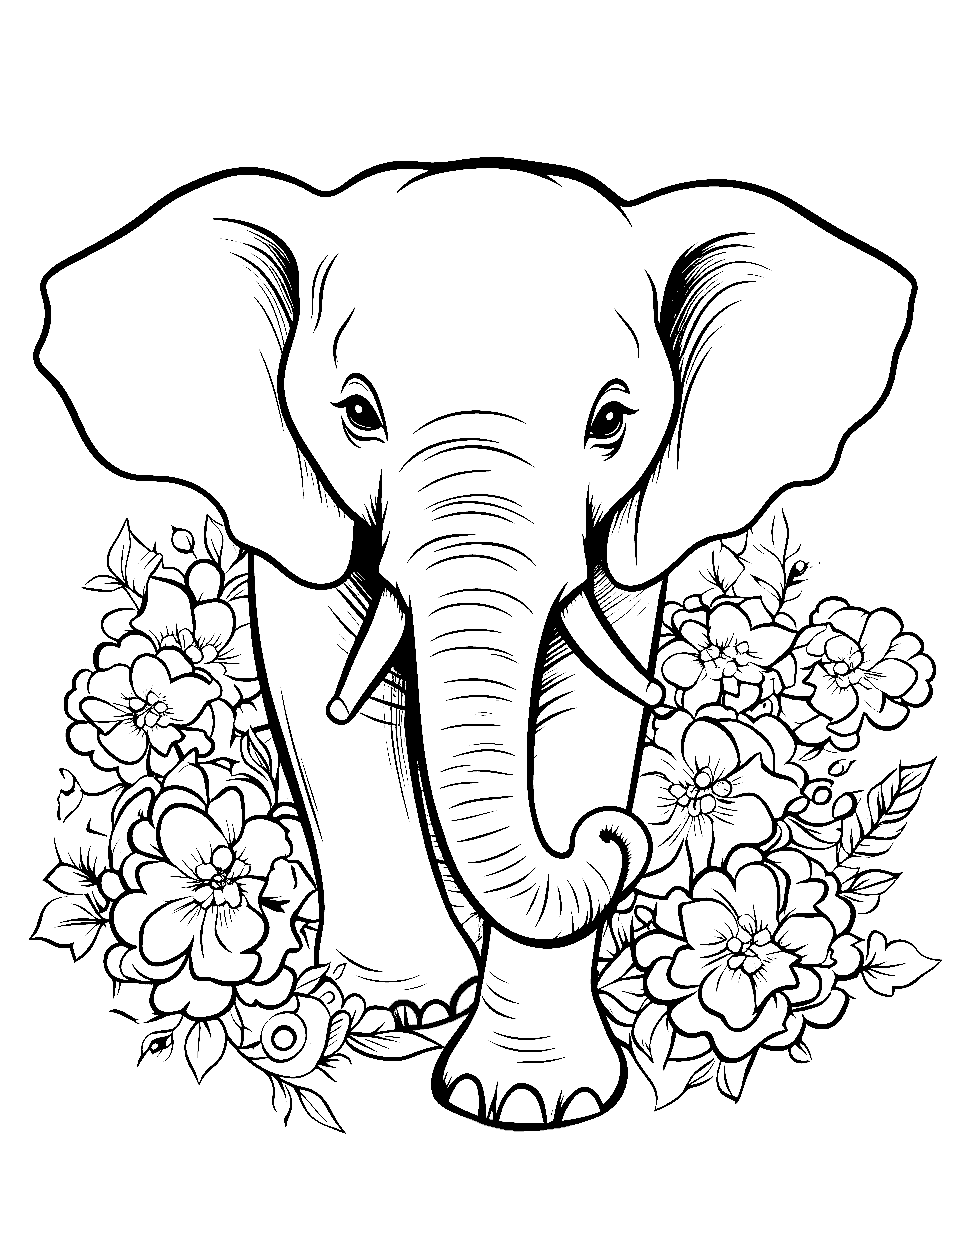 Elephant's Garden Party Coloring Page - An elephant surrounded by blooming flowers.